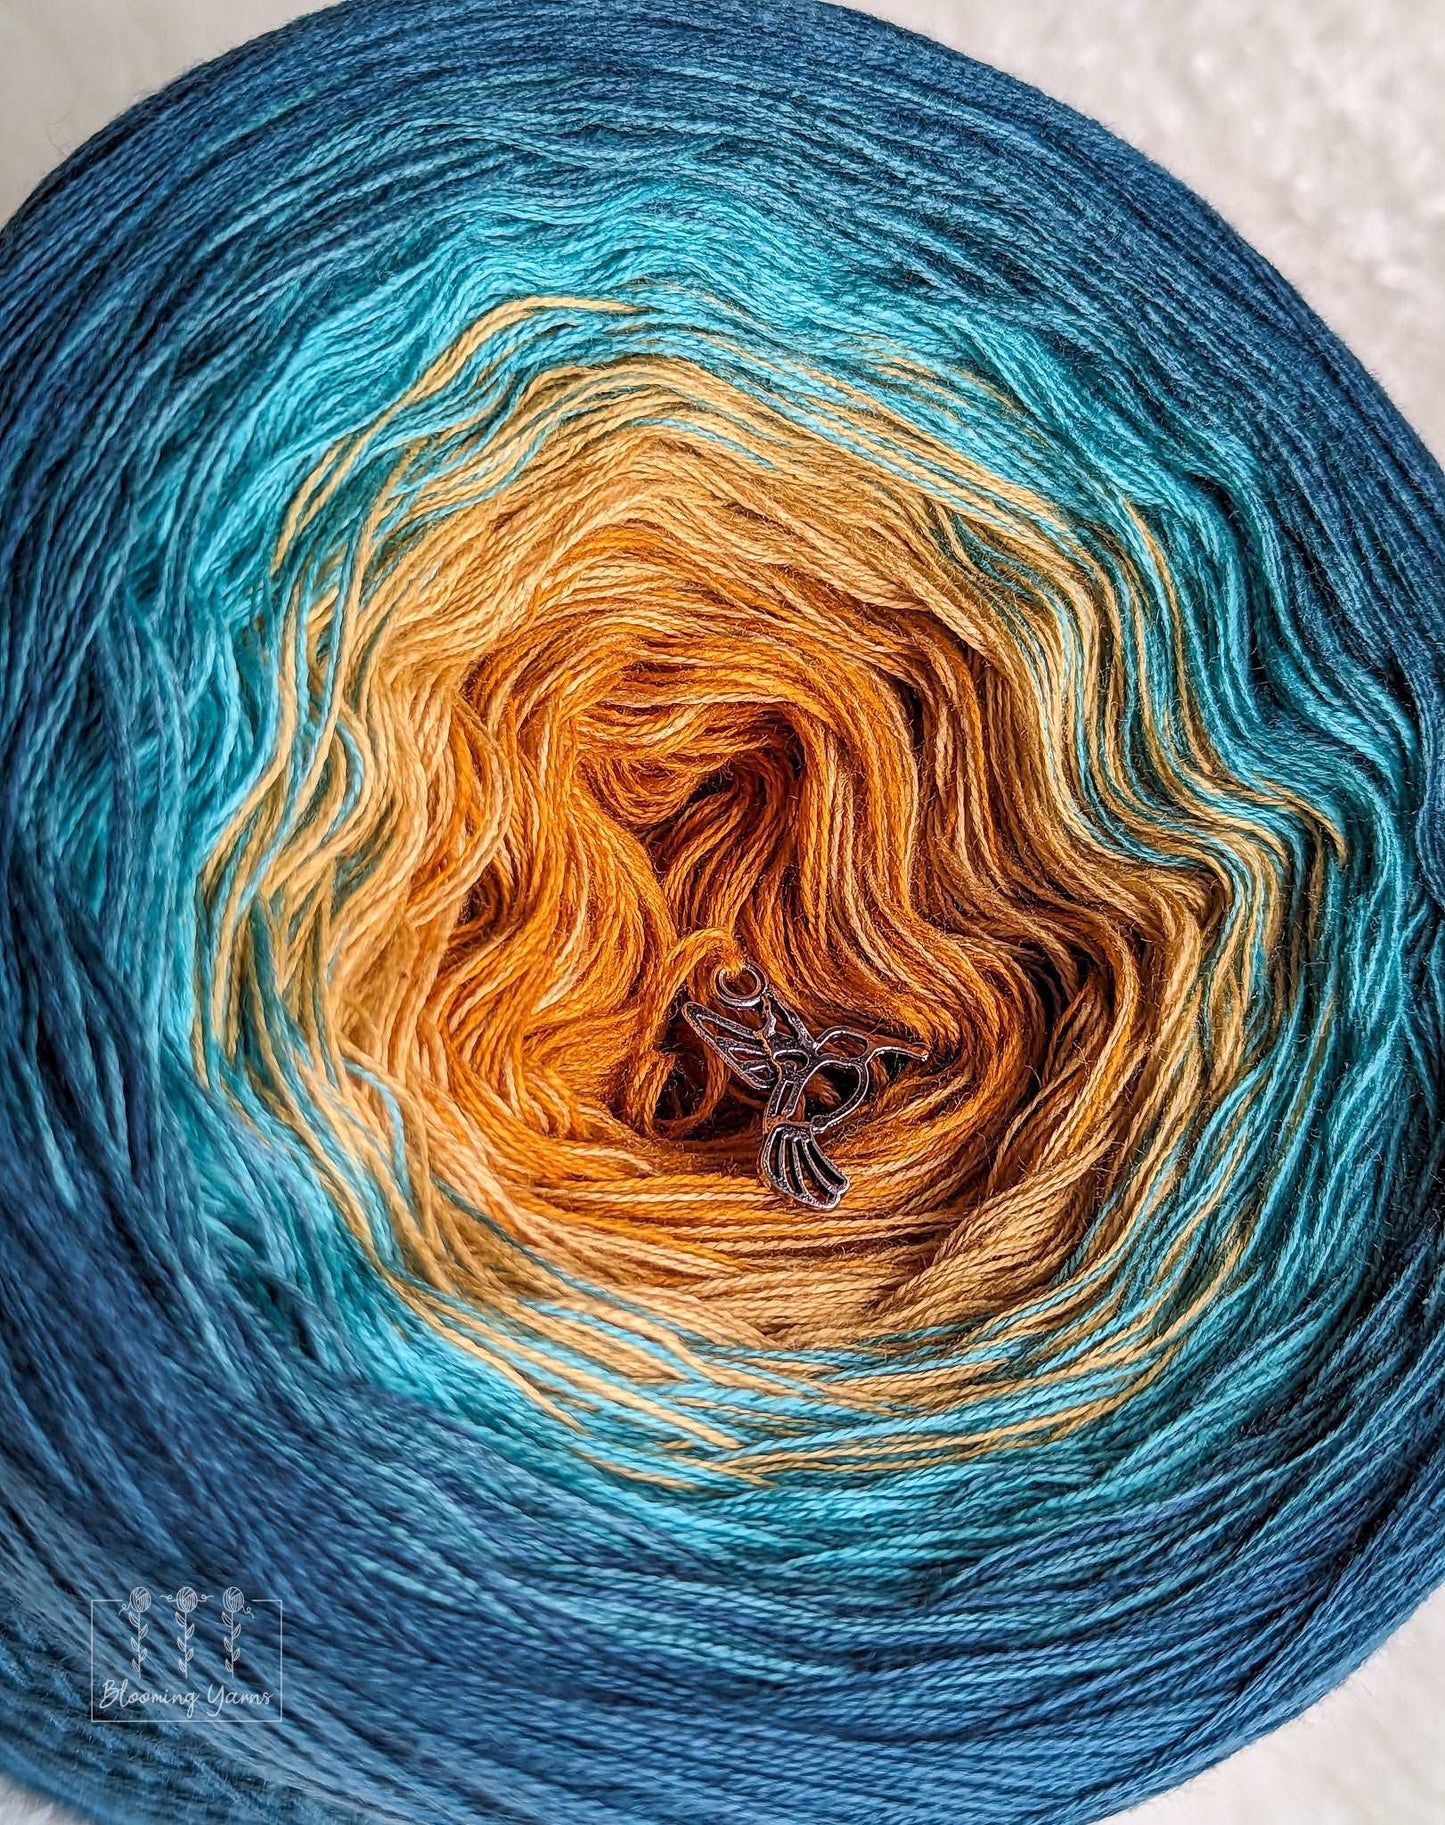 "Kingfisher" gradient ombre yarn cake created by Ancy-Fancy